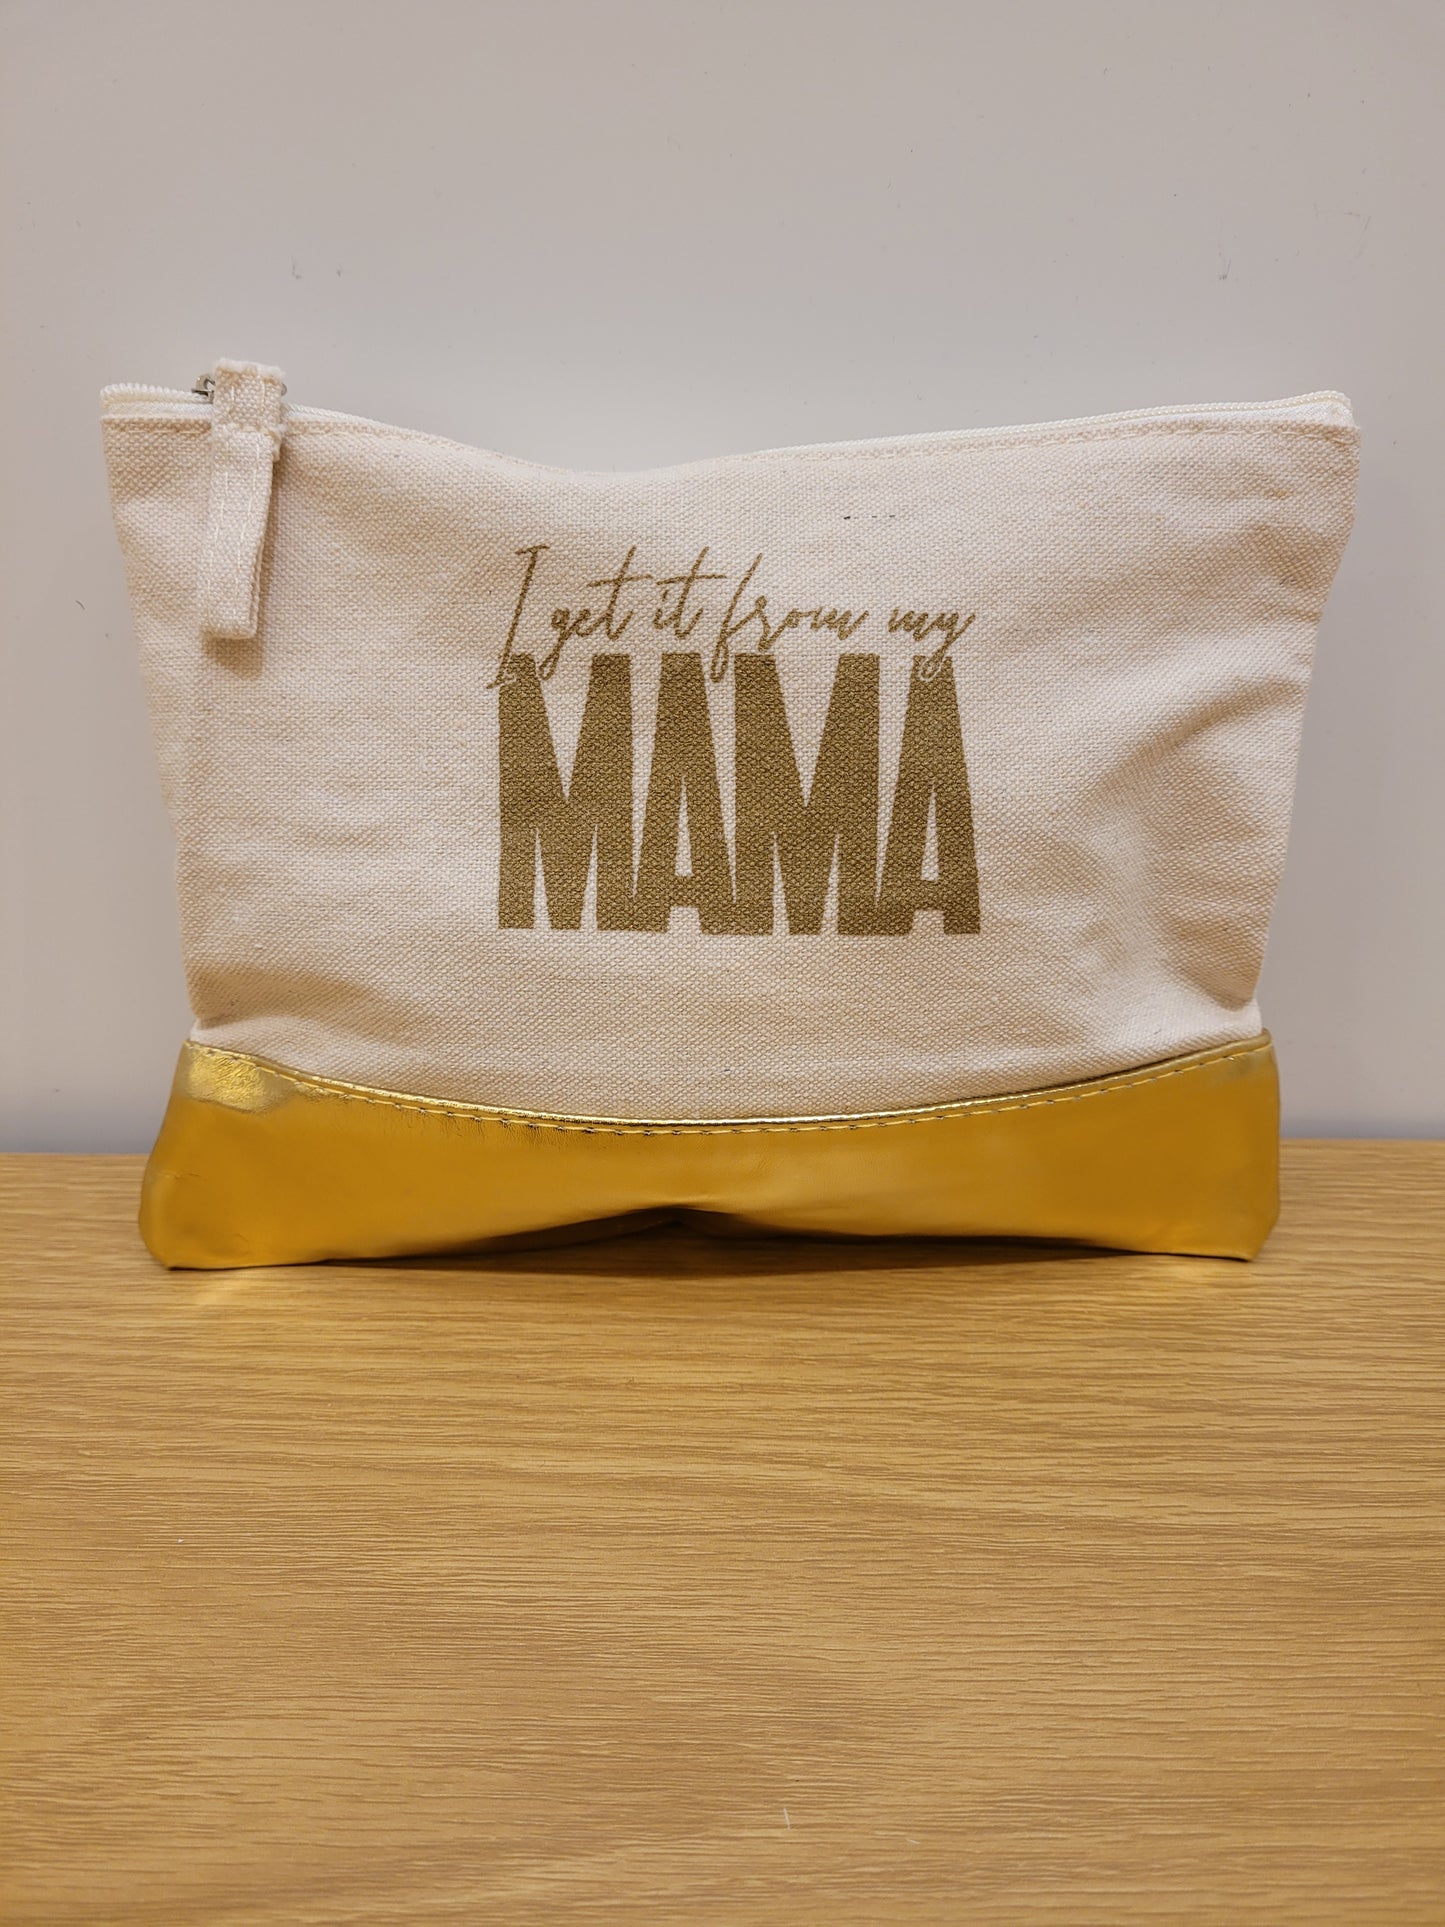 I Get it from my Mama - Cosmetic Bag